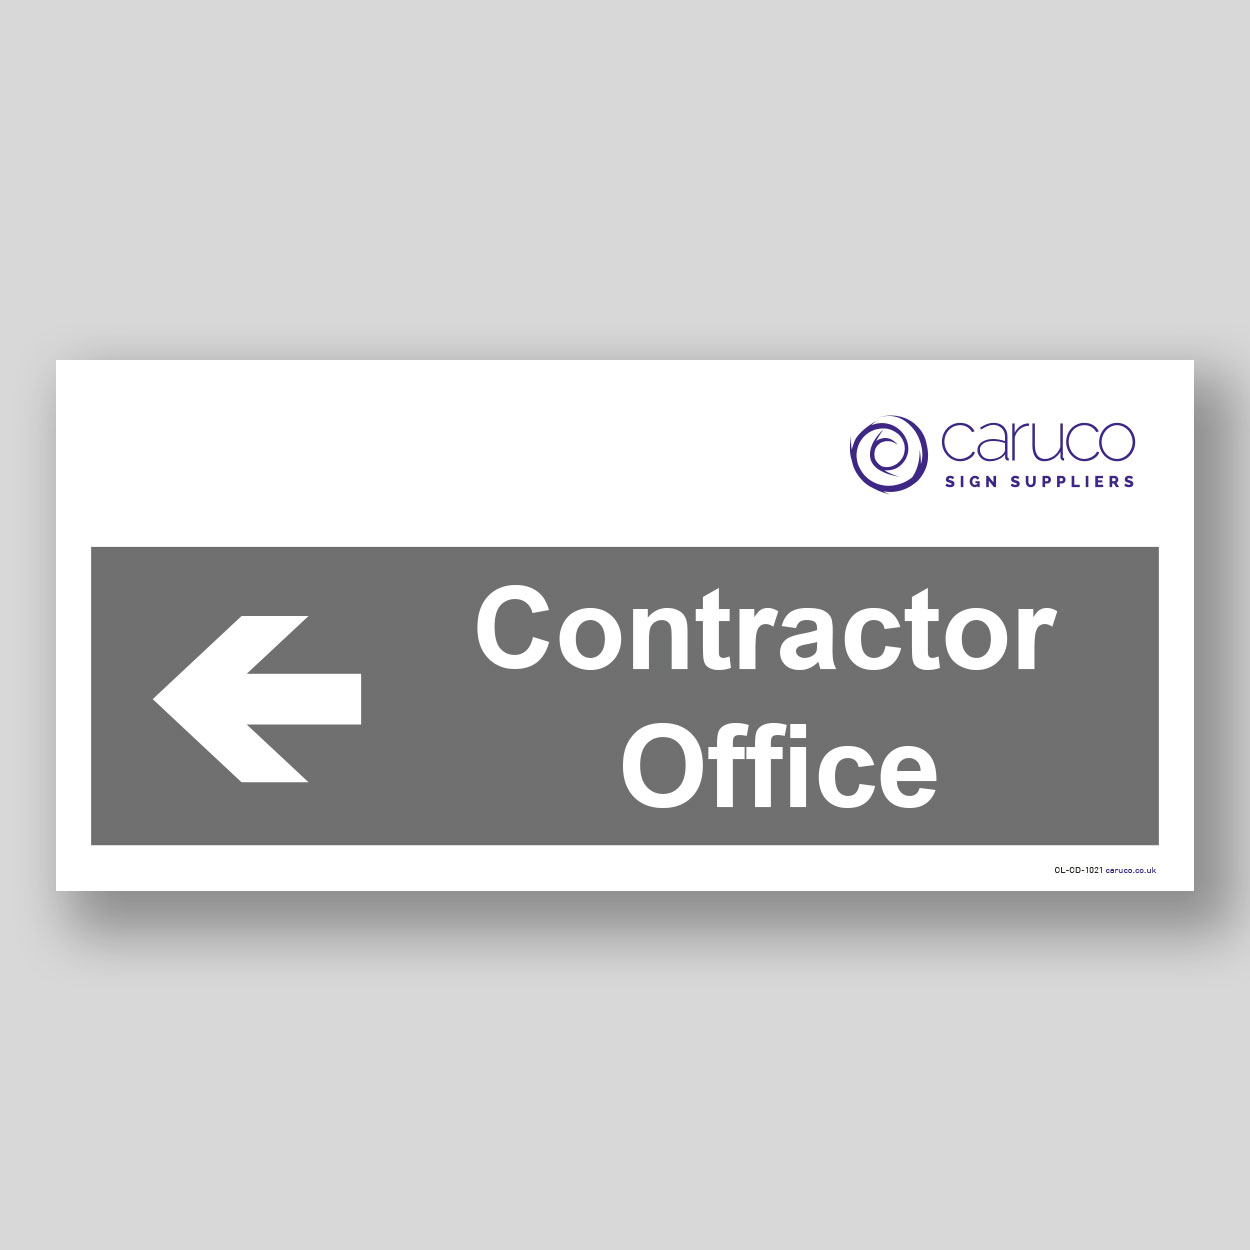 CL-CD-1024 Contractor office with left arrow